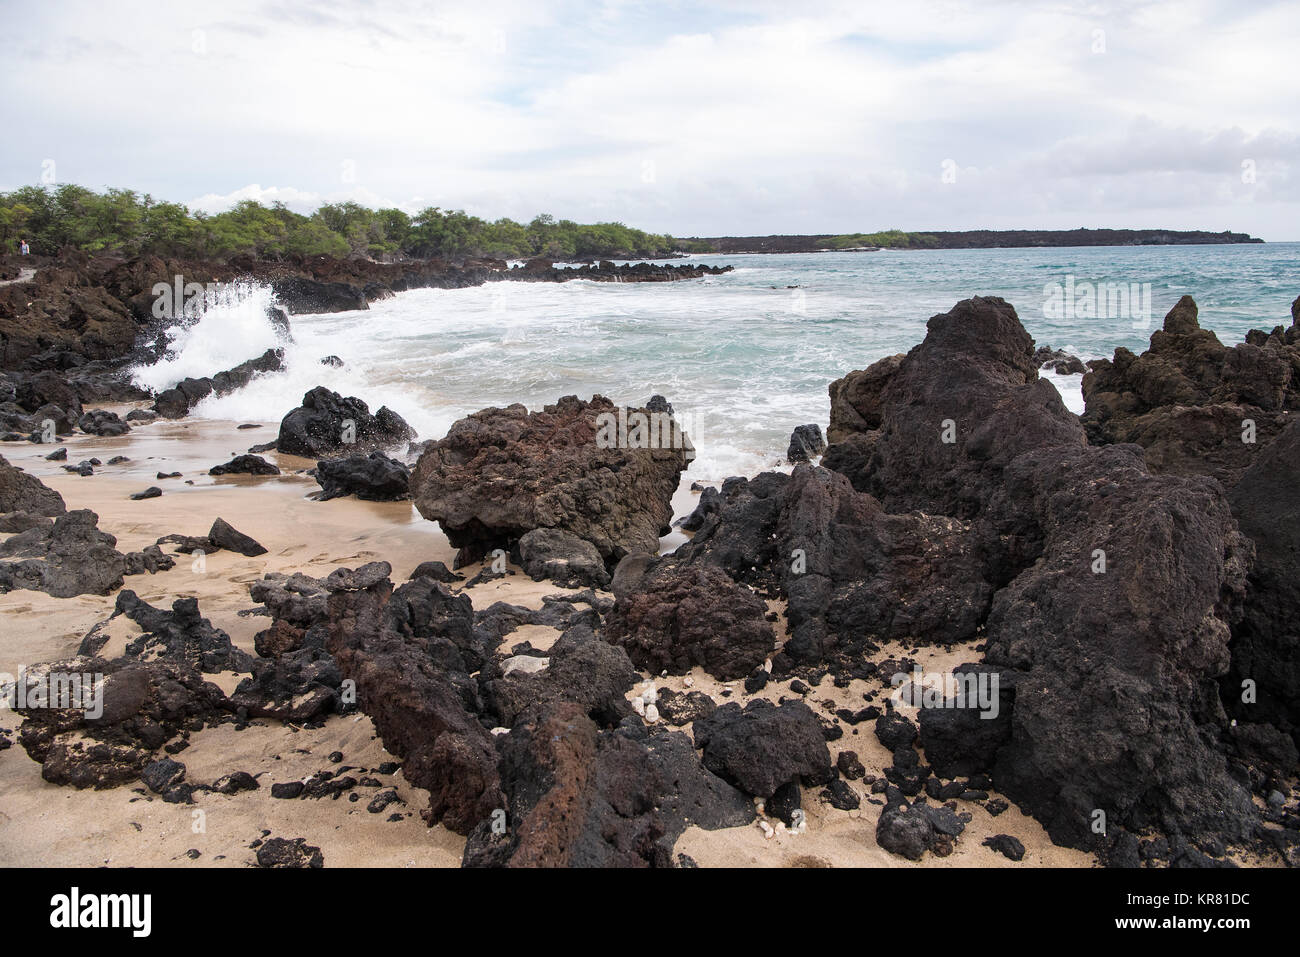 Rough lava rocks at La Perouse Bay. The bay, which was originally named Keone'o'io, is part of the Ahihi-Kina'u Natural Area Preserve located at the v Stock Photo